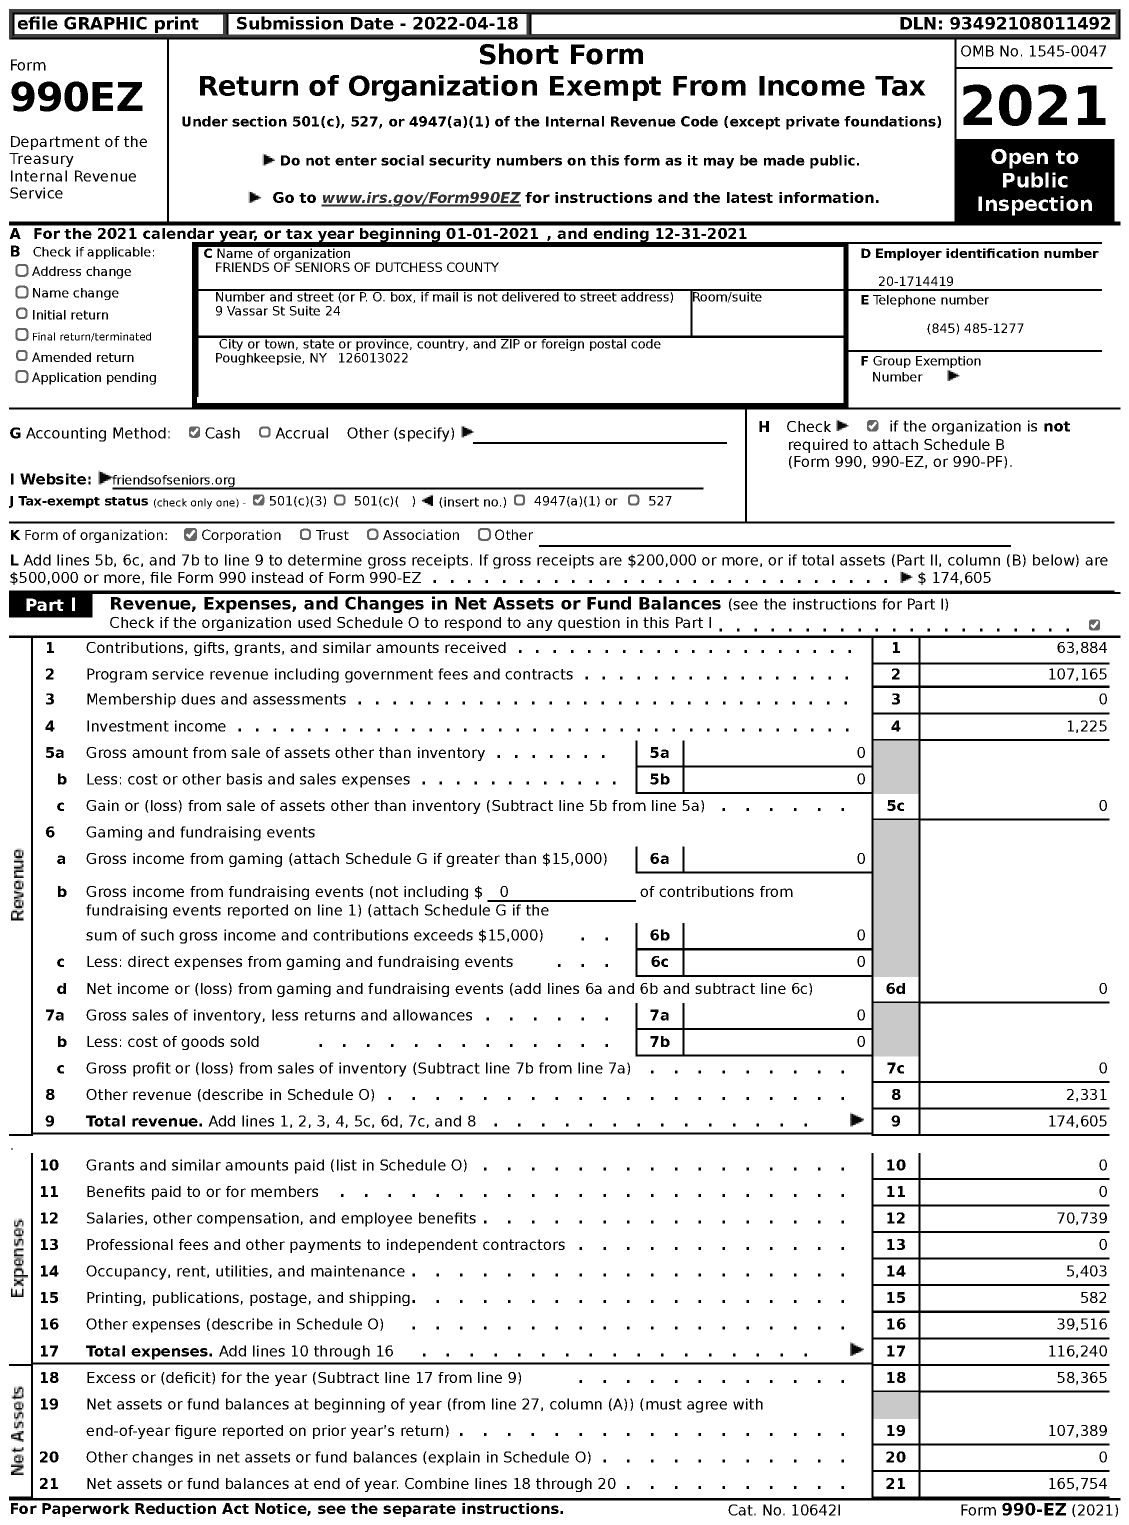 Image of first page of 2021 Form 990EZ for Friends of Seniors of Dutchess County